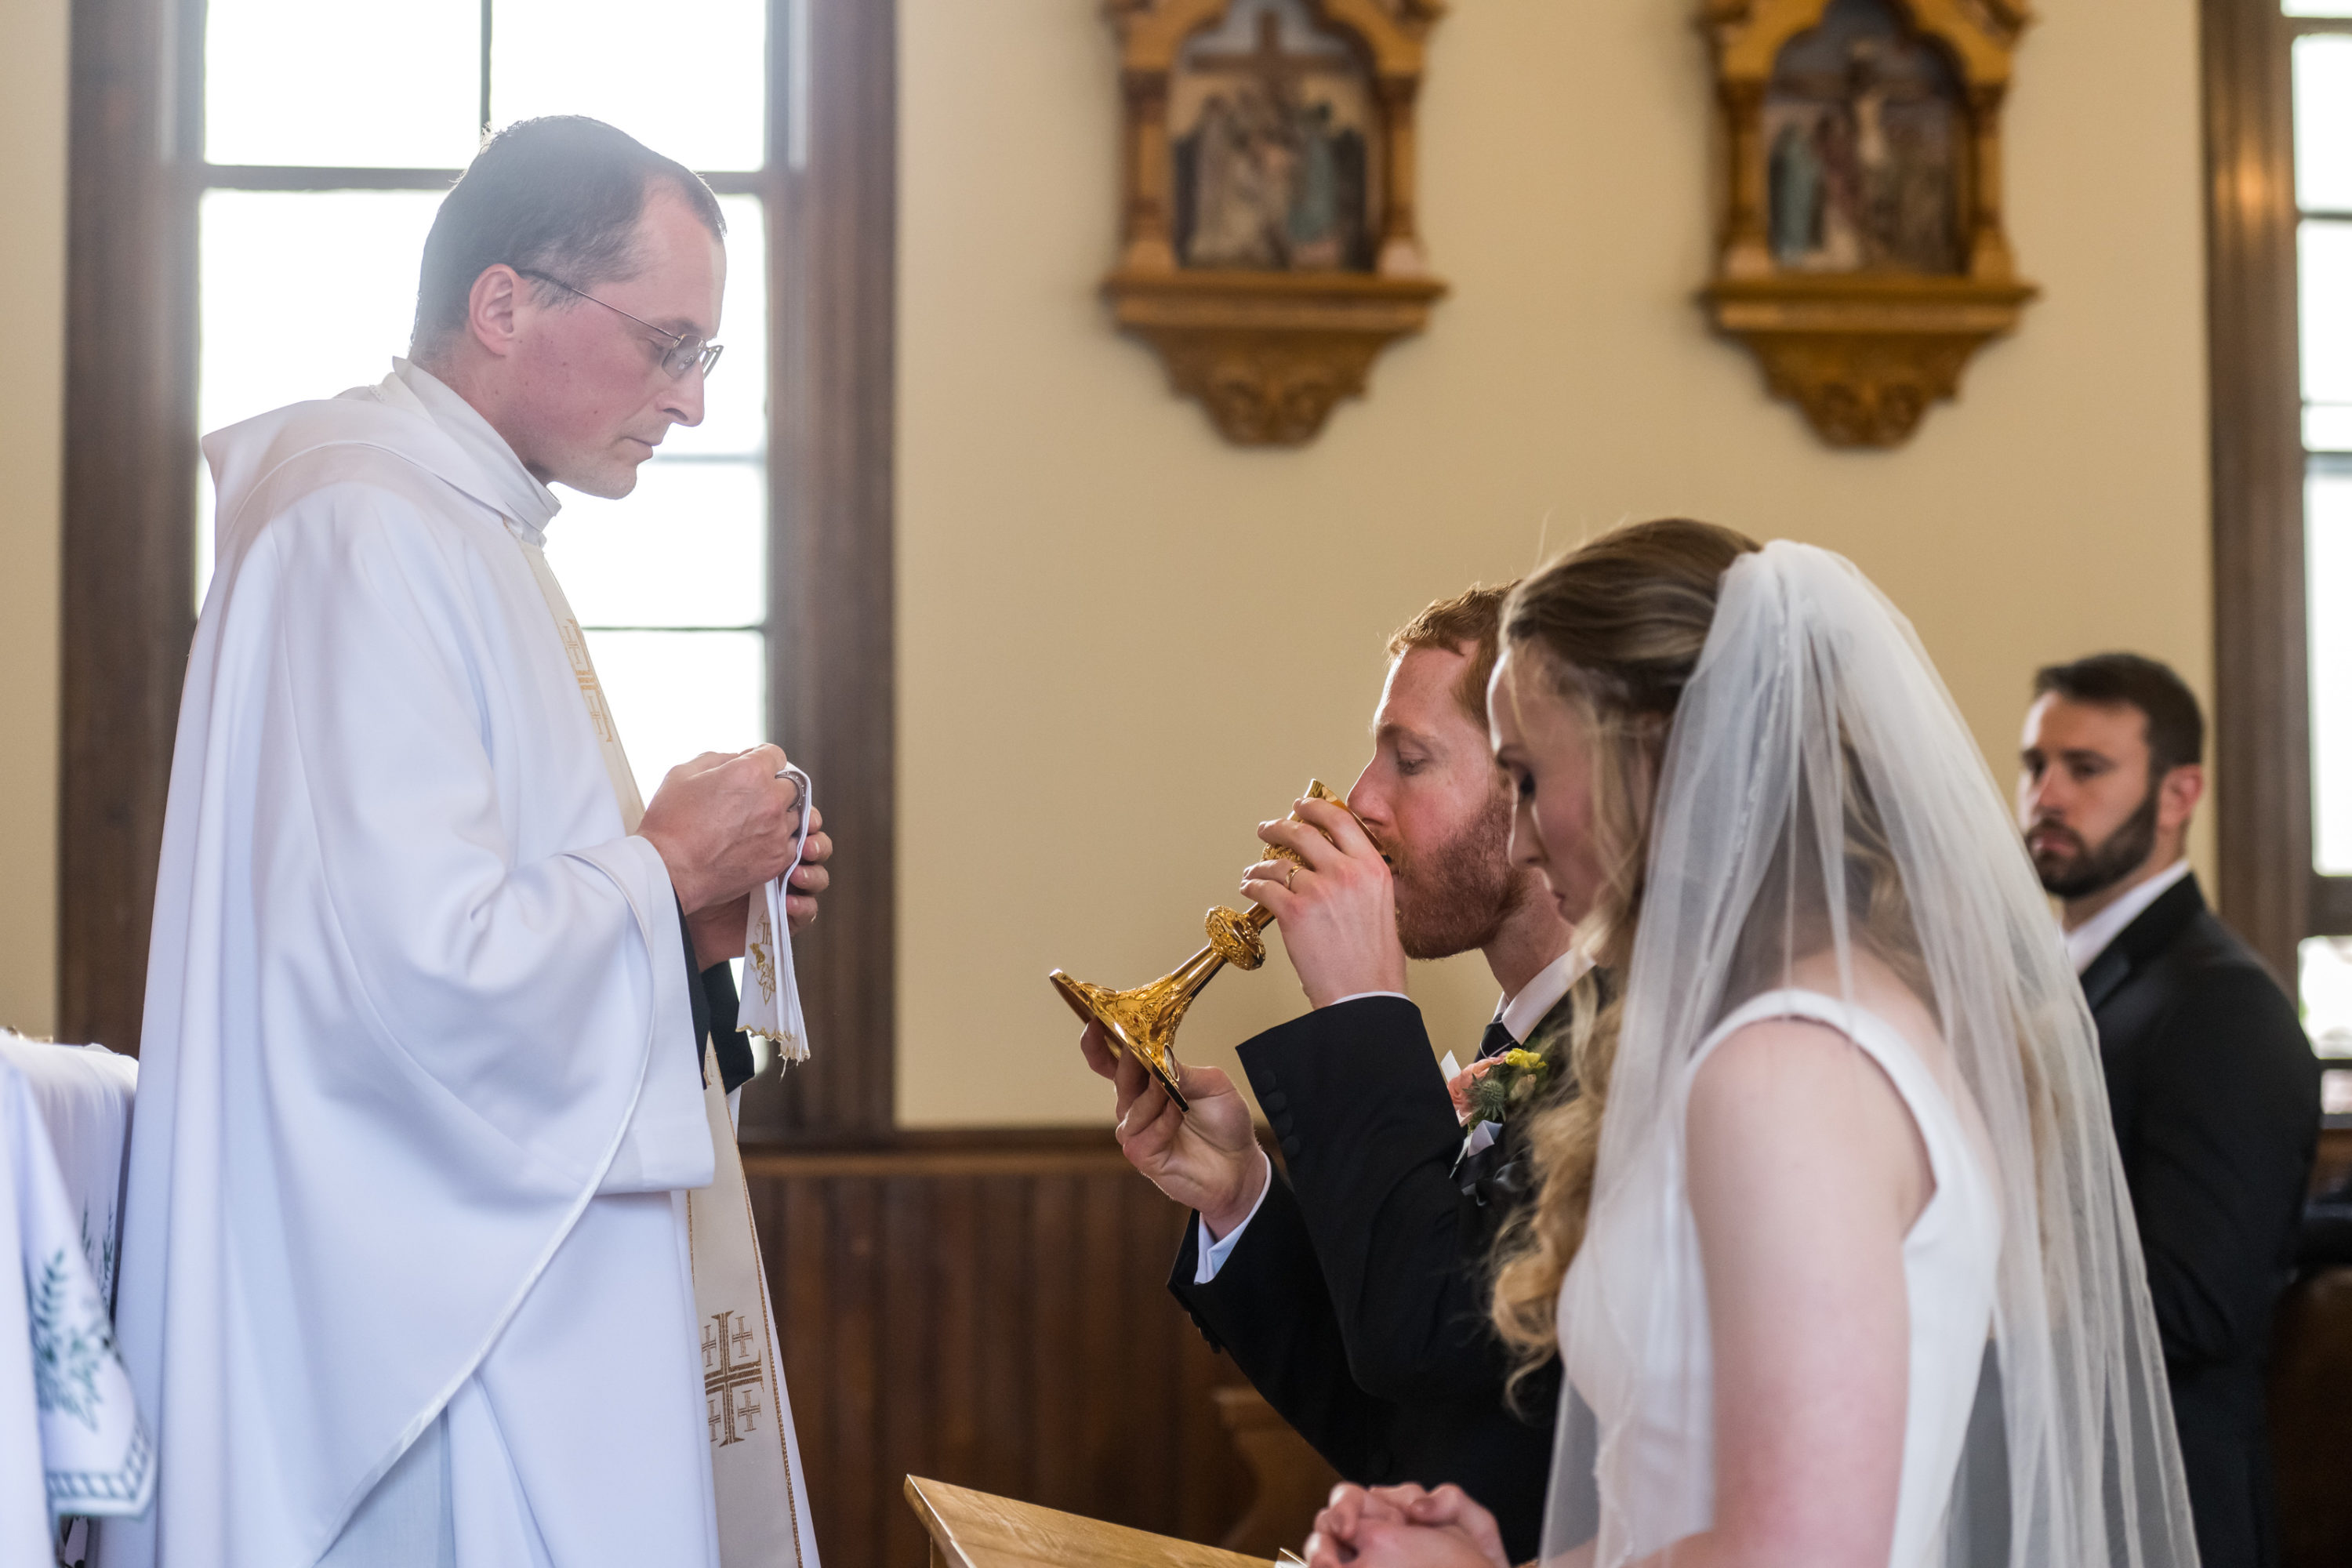 The groom sips consecrated wine during his wedding at St. Patrick's Church Telluride.